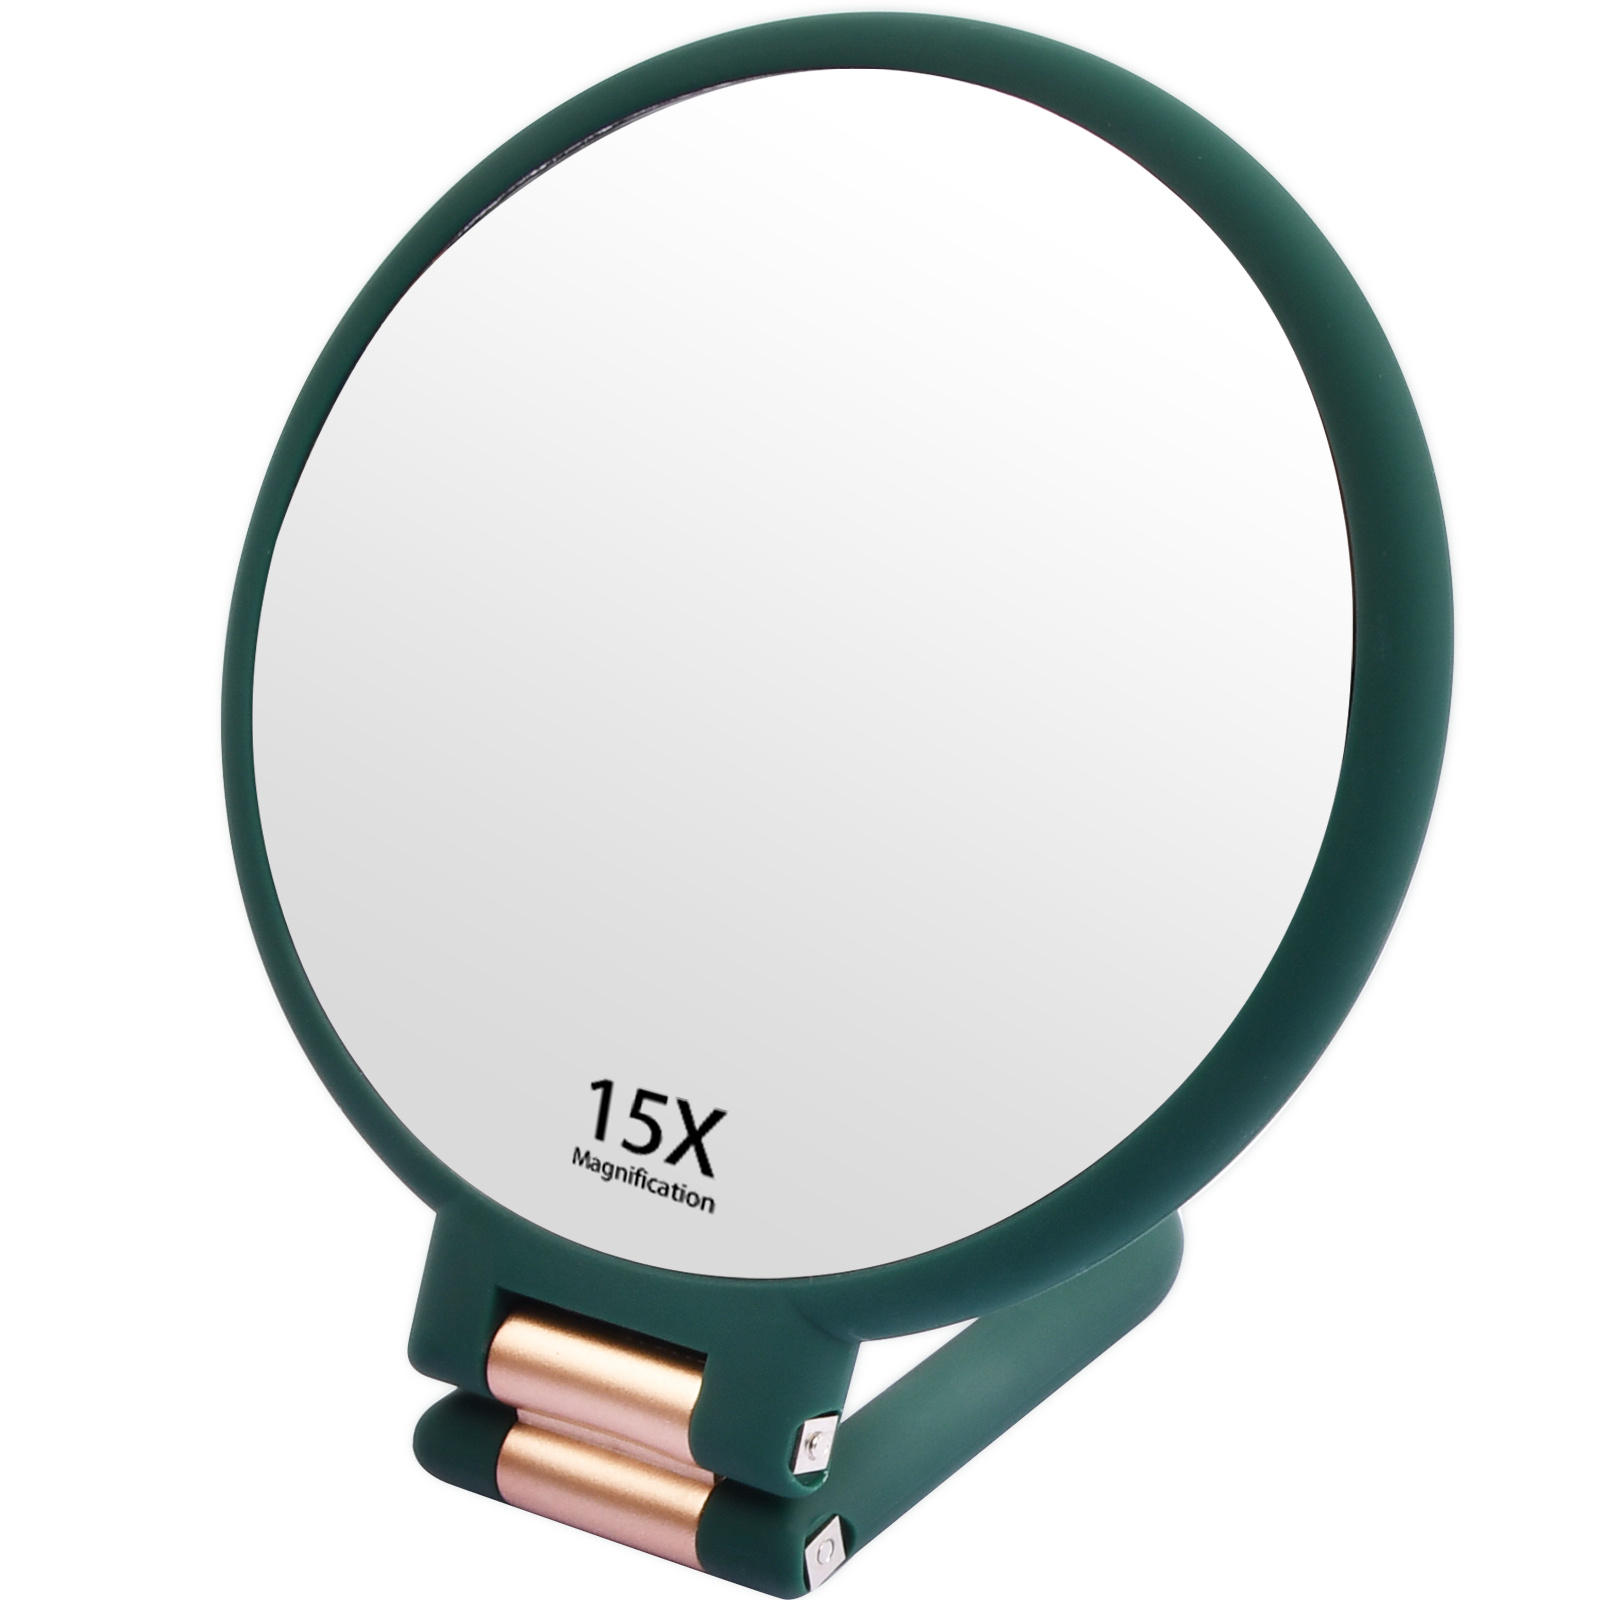 

1x 15x Magnifying Hand Held Mirror, Double Side Folding Hand Mirror For Women Men With Adjustable Handle, Travel Table Desk Shaving Bathroom - Green